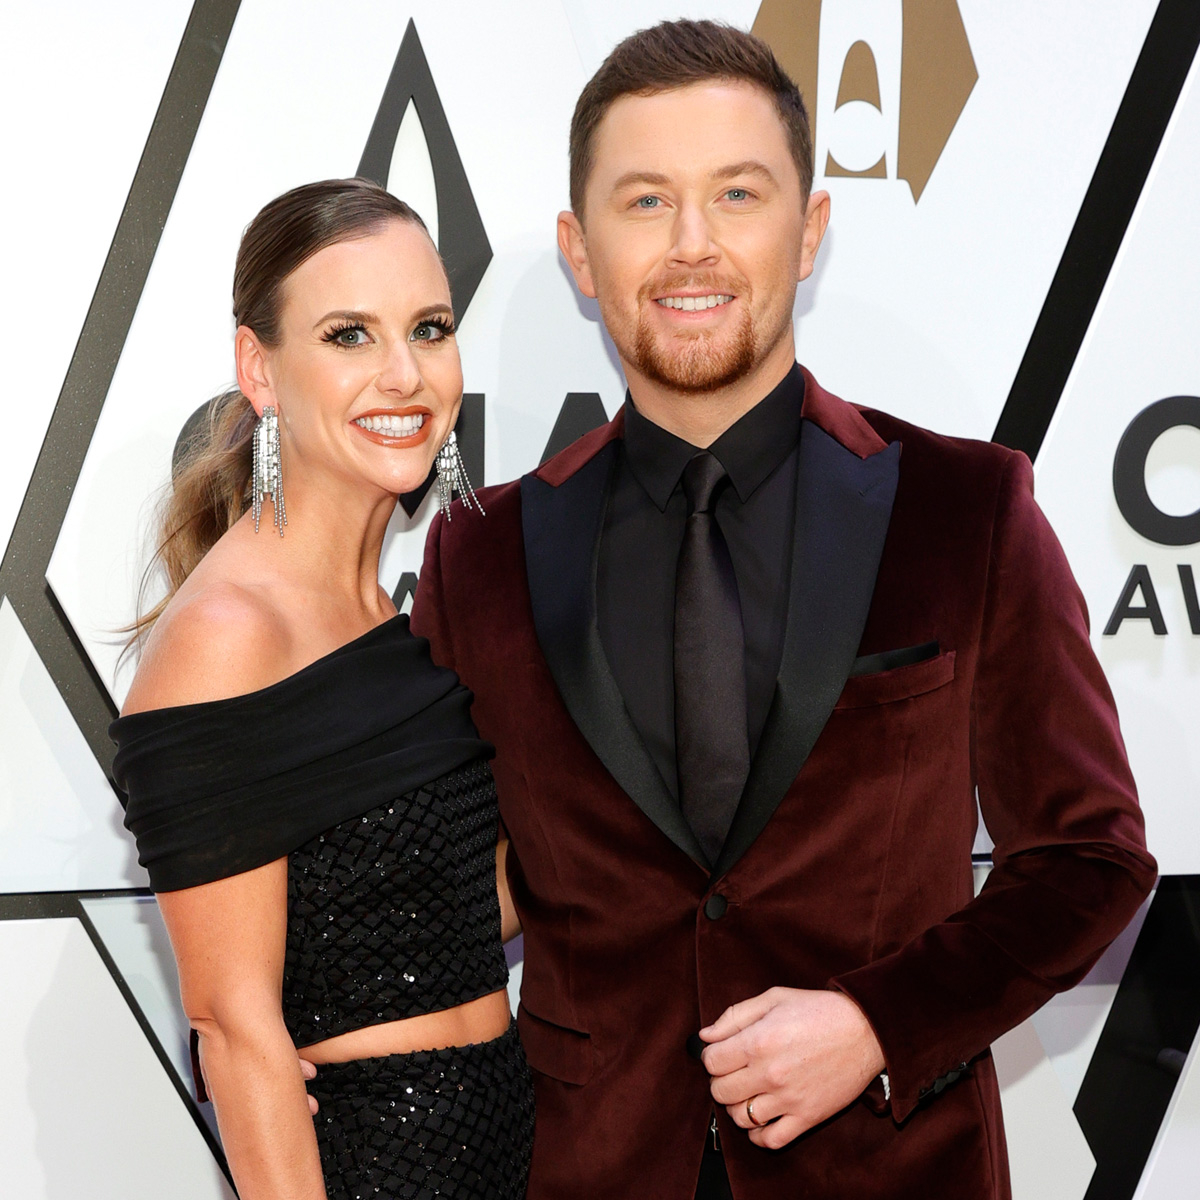 American Idol's Scotty McCreery and Wife Gabi Expecting First Baby